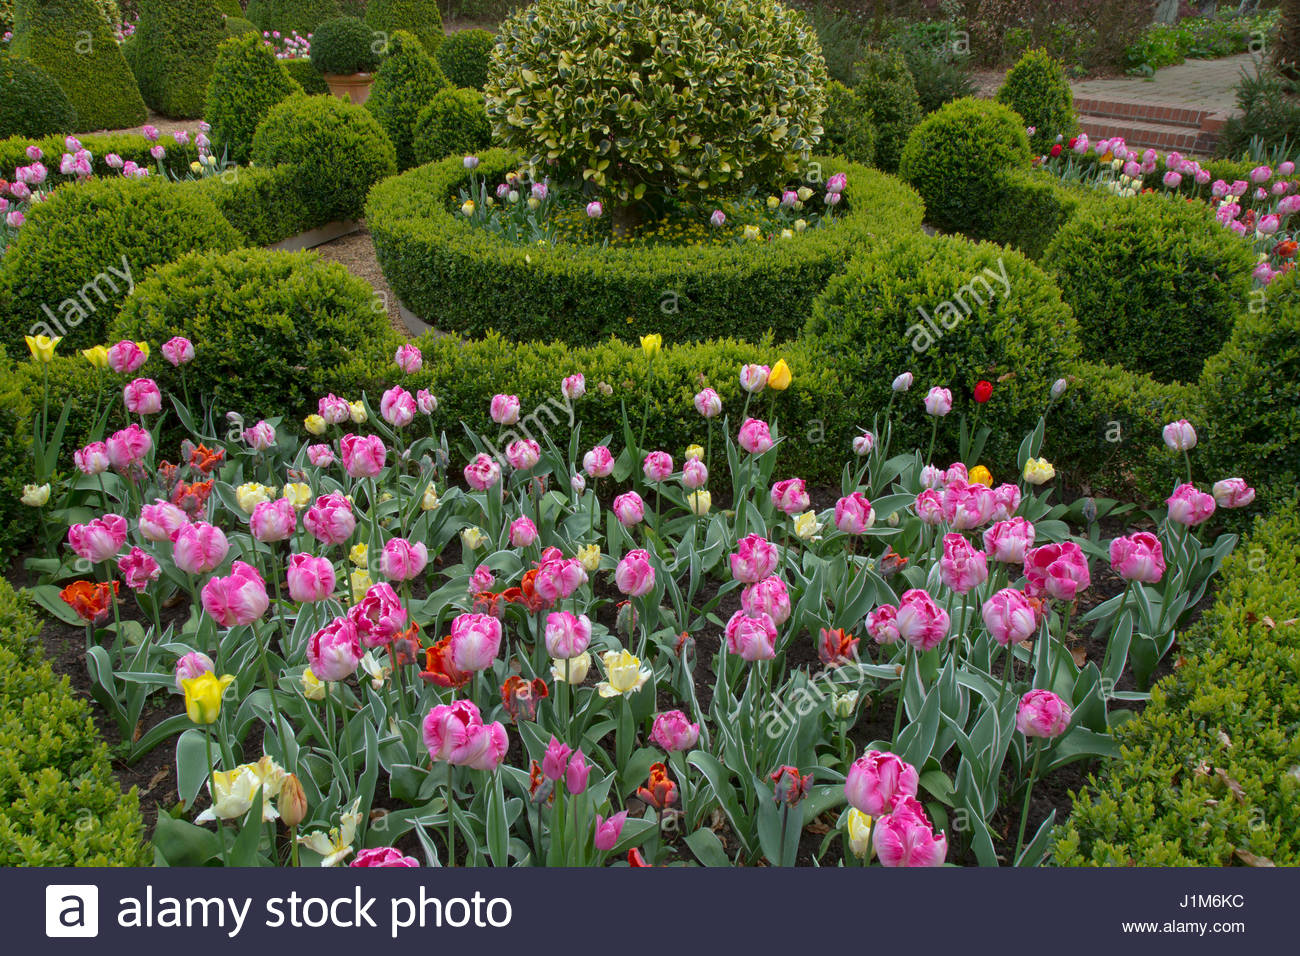 Fringed Tulip Dallas Pink And Tulipa Swan Wings White And Stock Photo Alamy